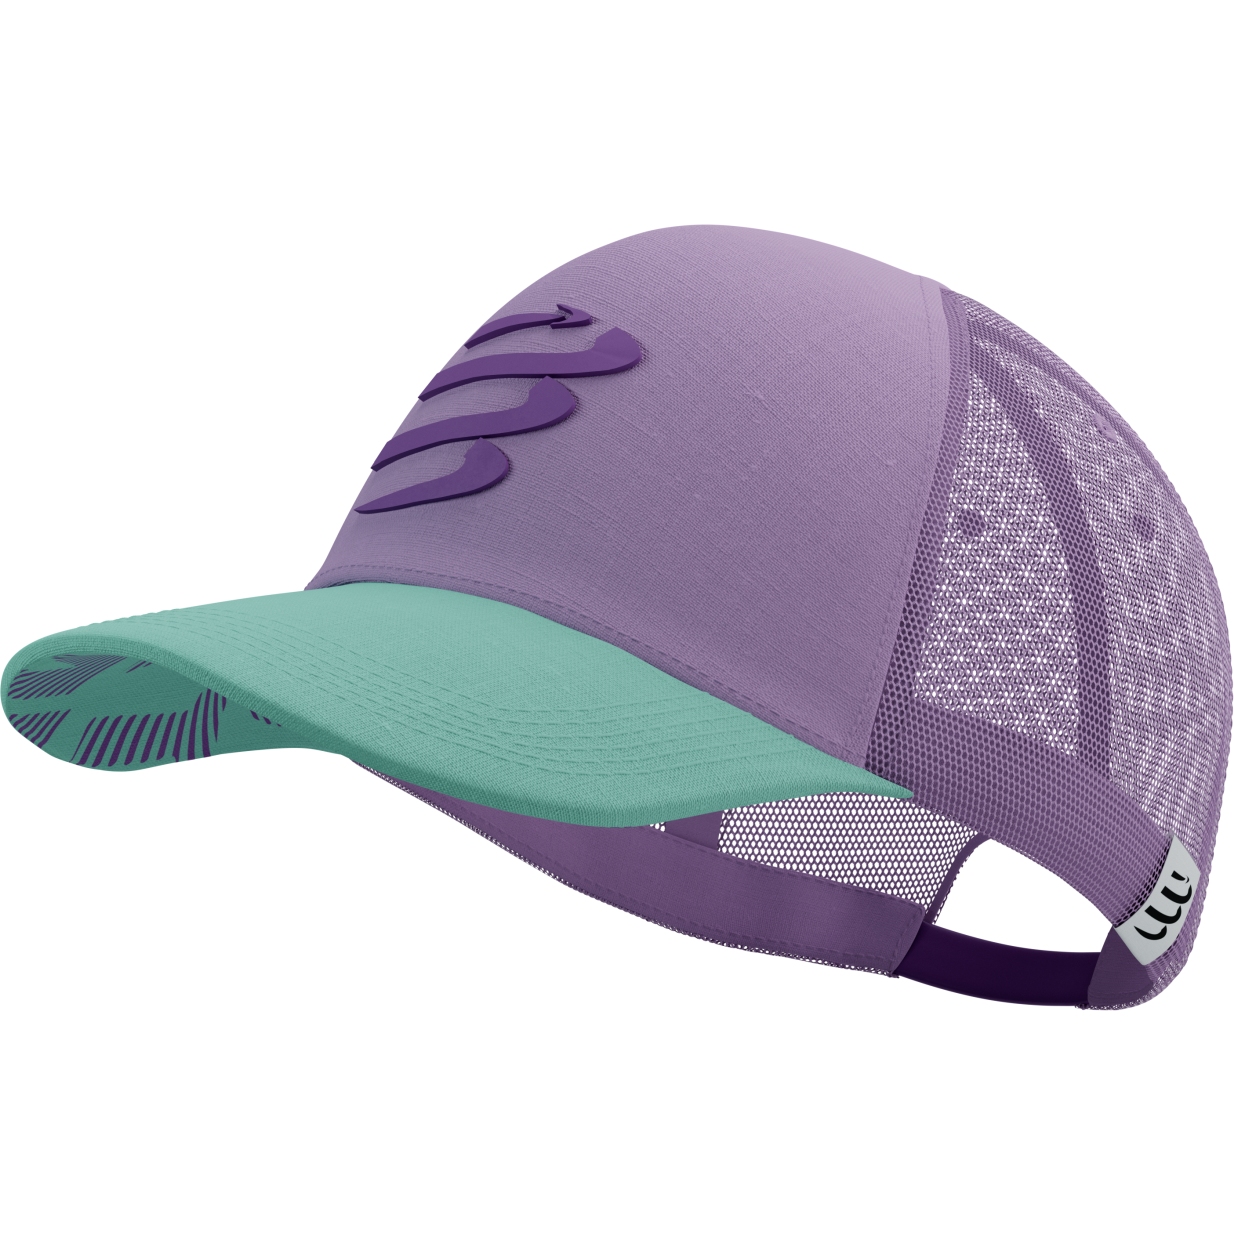 Picture of Compressport Trucker Cap - lupine/royal lilac/eggshell blue